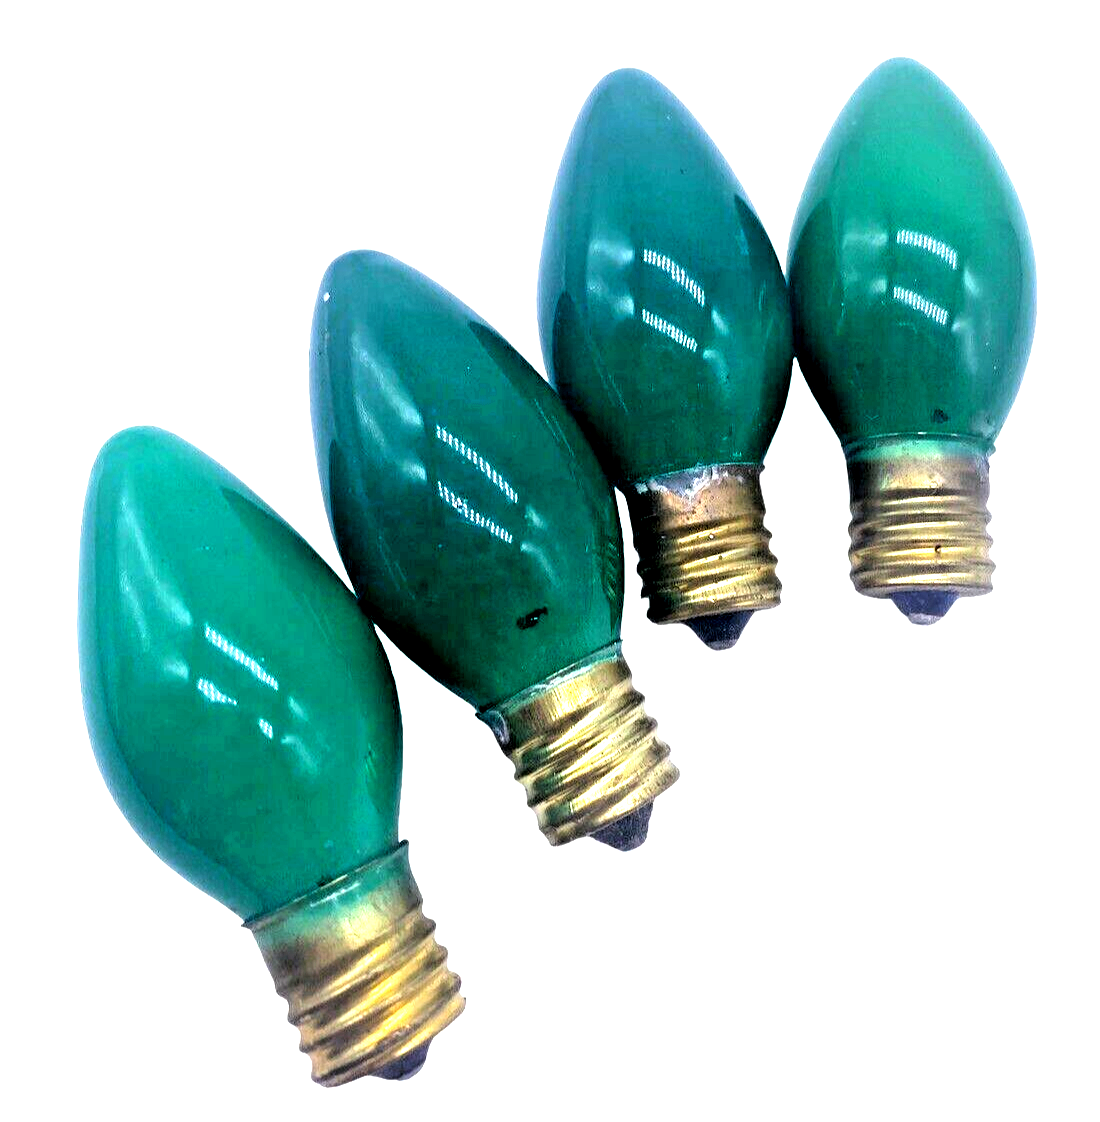 Primary image for Vtg Christmas Light Bulbs Colored Green Decor Crafts Untested Decorative Lot 4